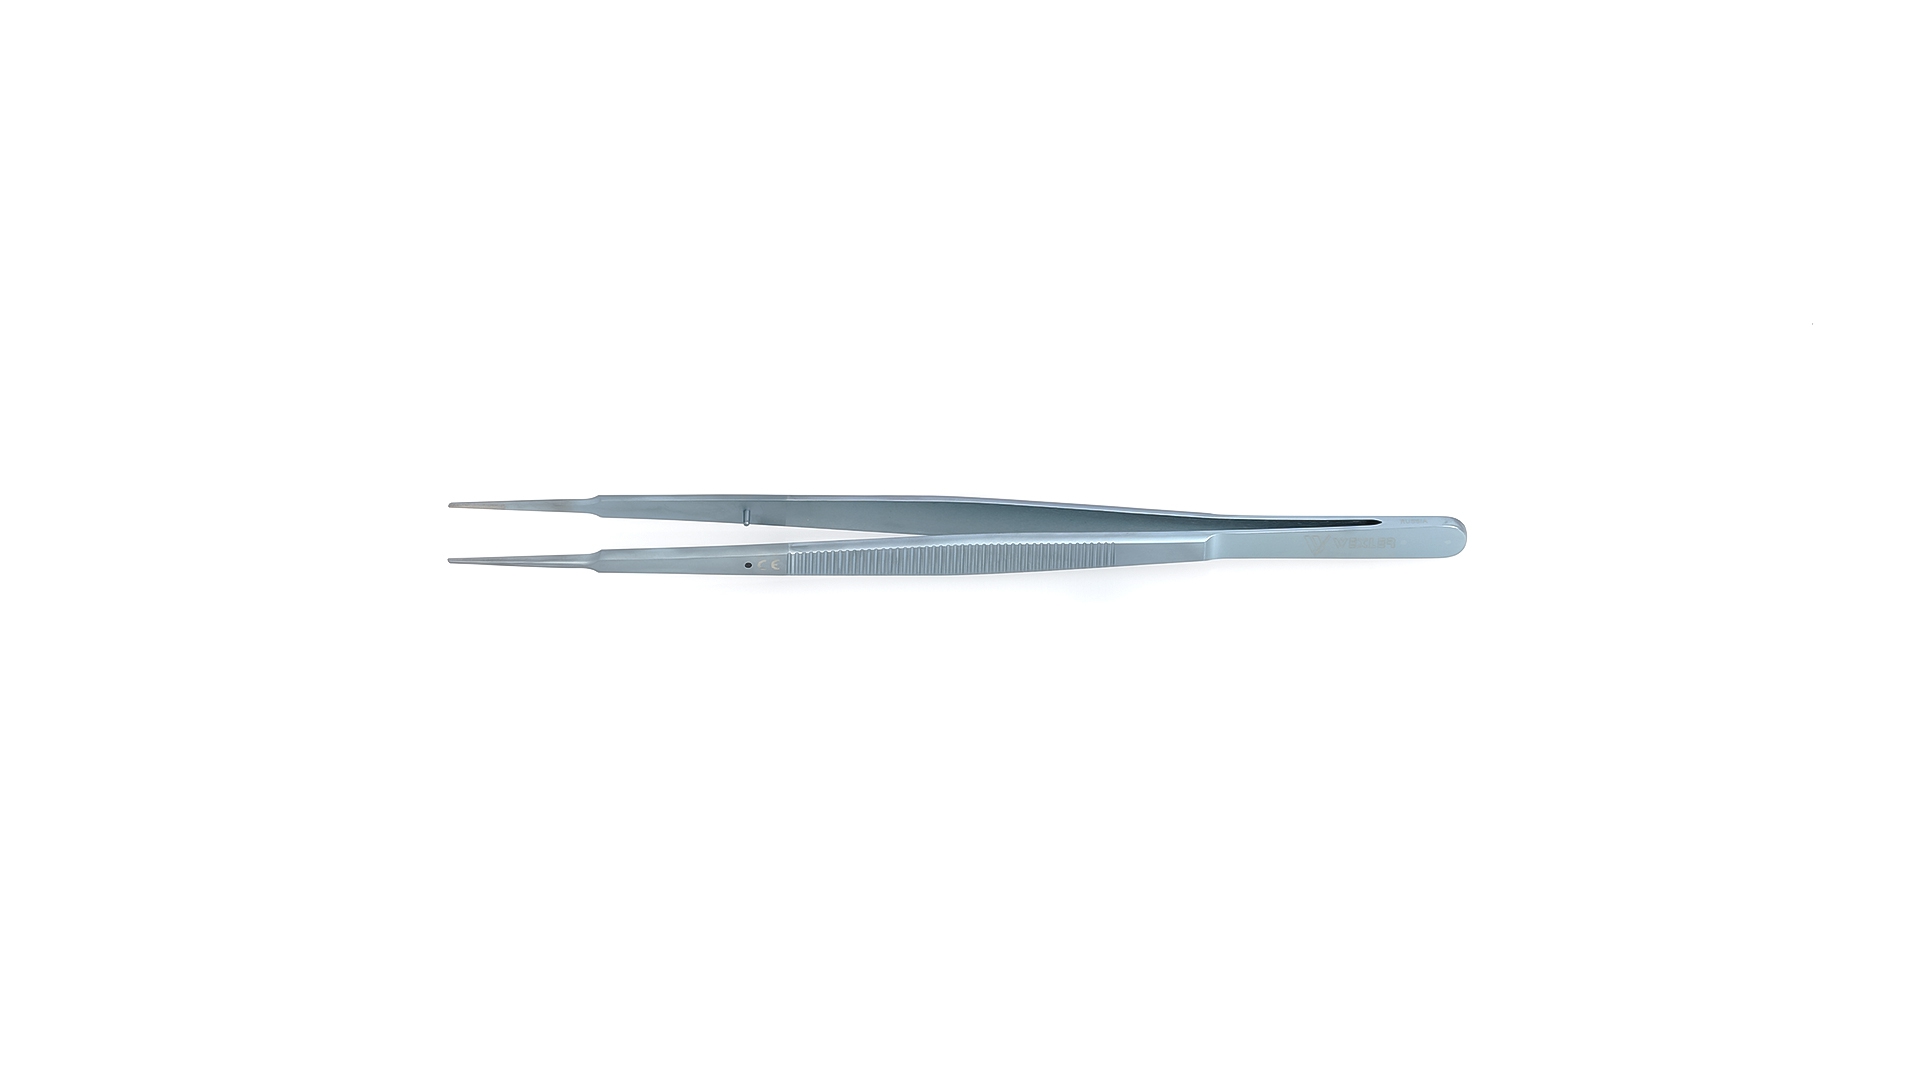 Gerald Forceps - Straight 0.7mm TC coated tips